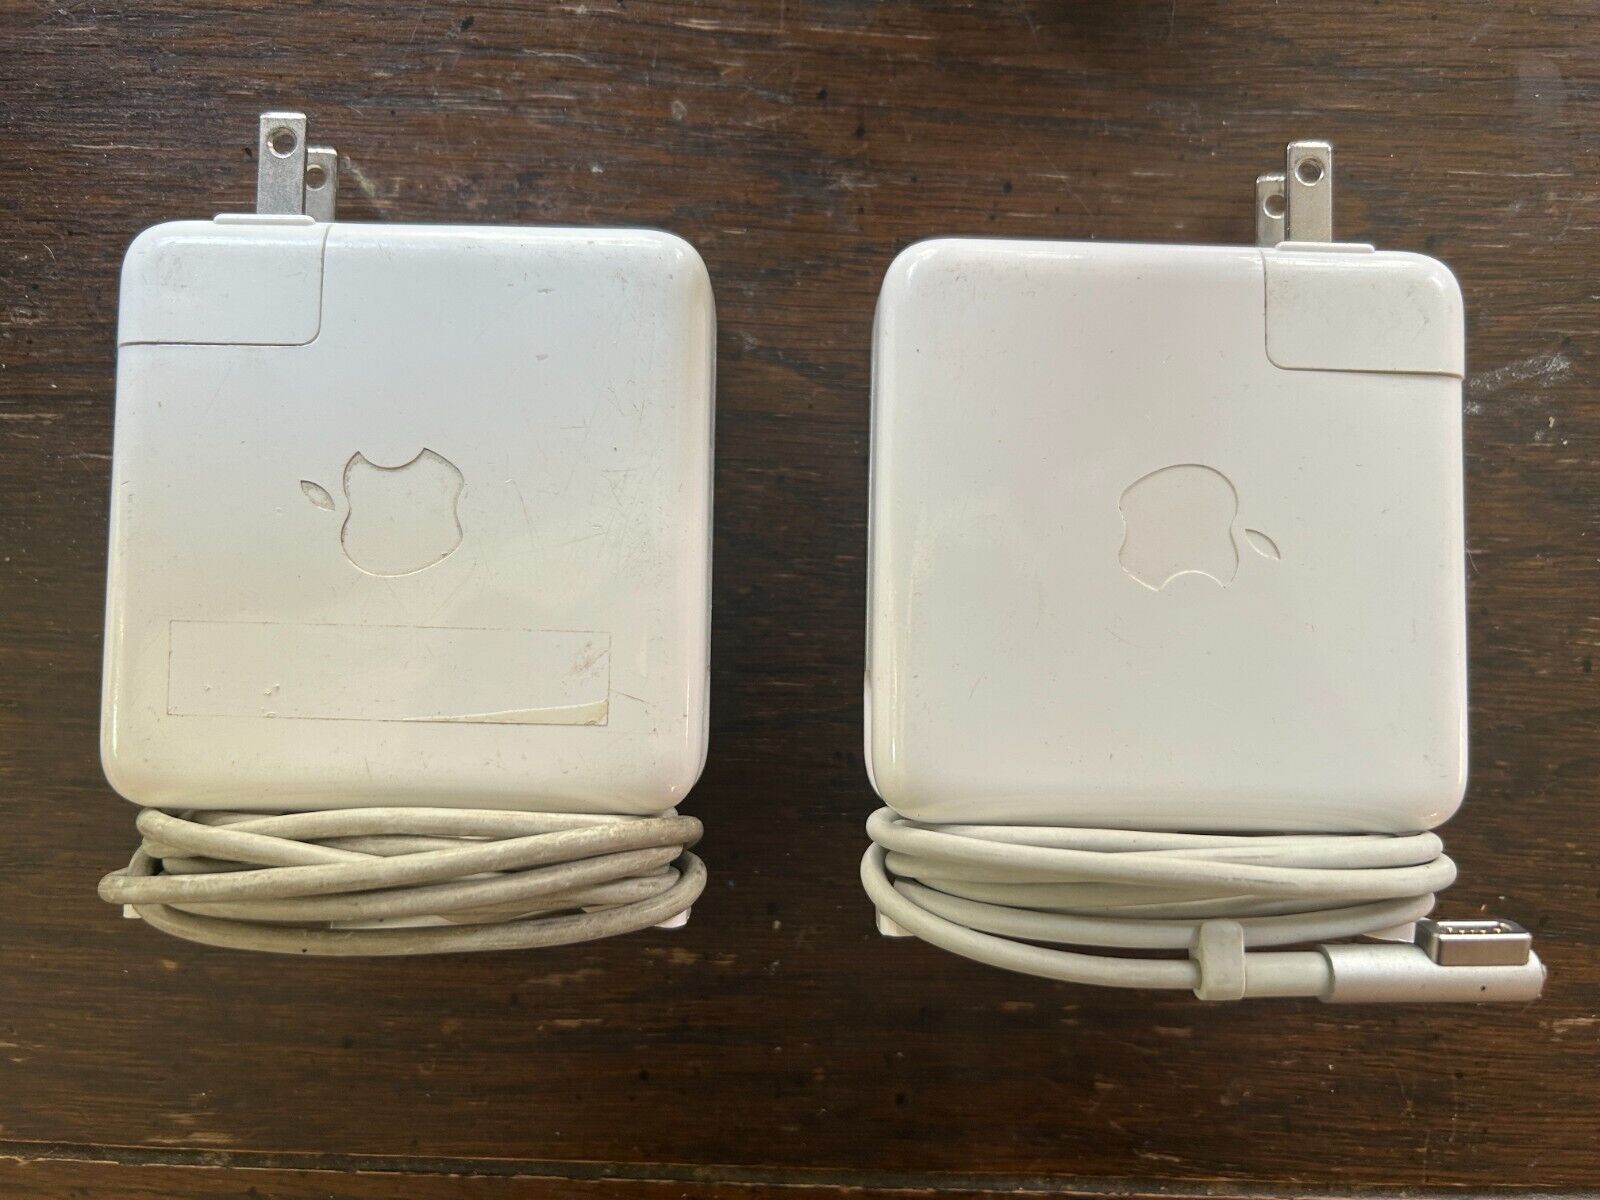 LOT OF TWO (2) APPLE 85W A1343 MAGSAFE POWER ADAPTER USA Geniune used working